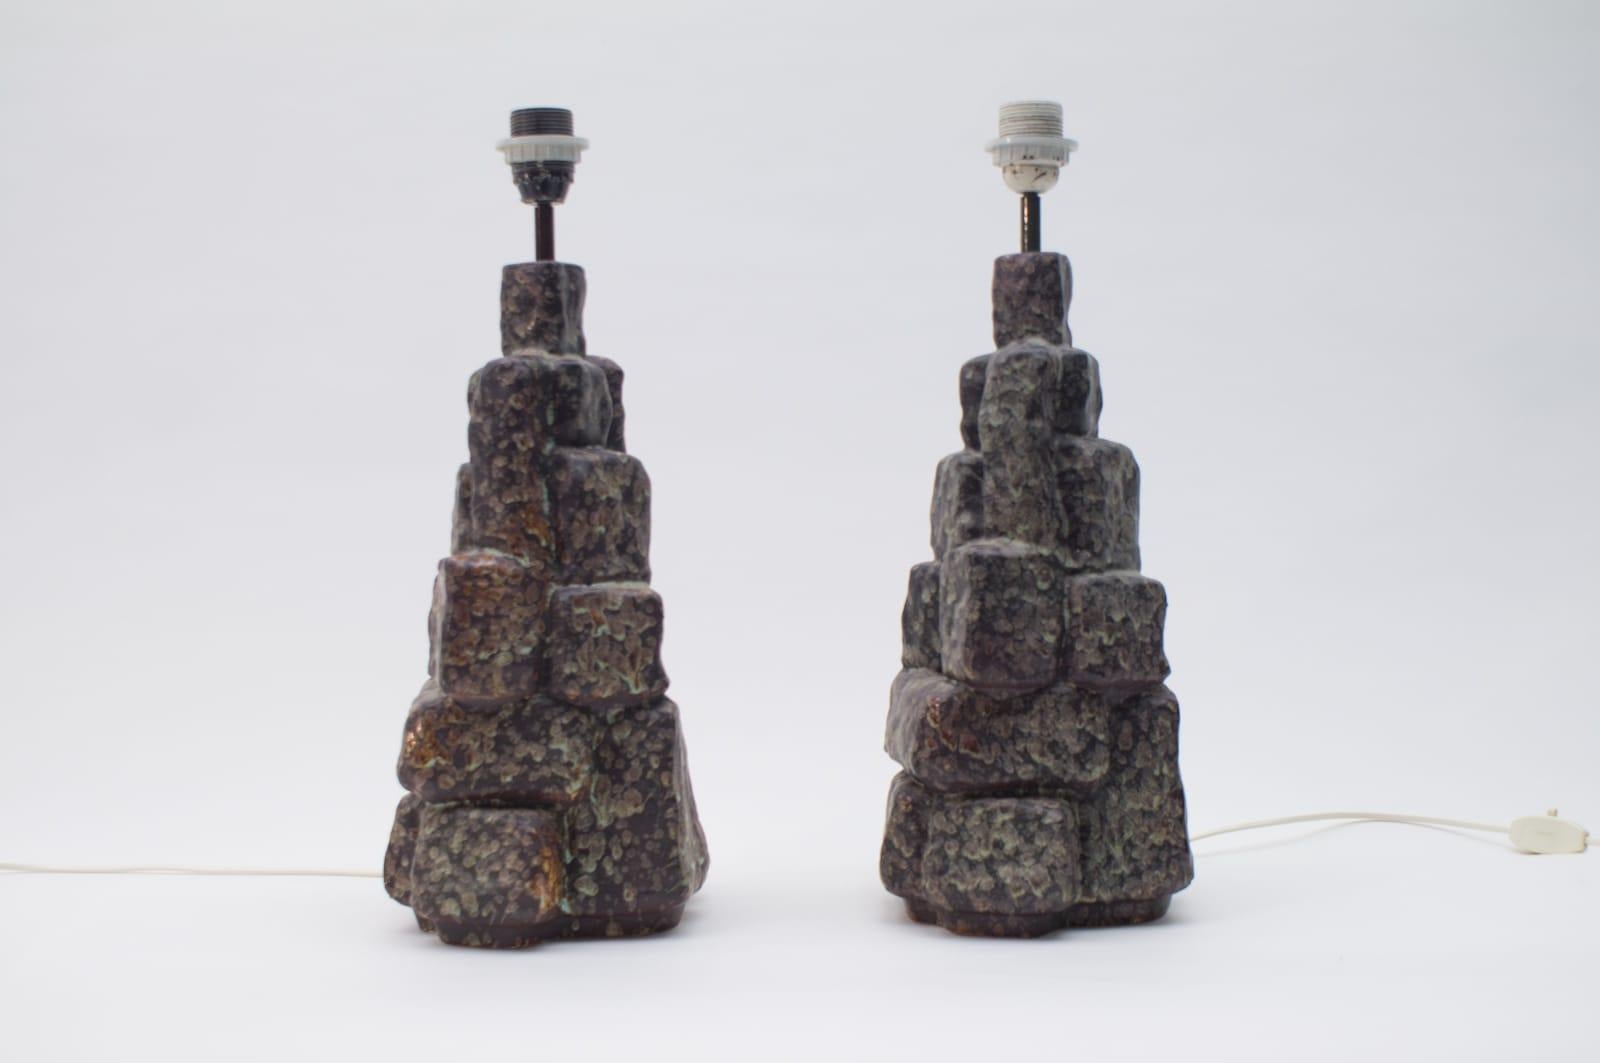 Italian Pair of Large Ceramic Table Lamps in the Shape of Rocks, 1960s Italy